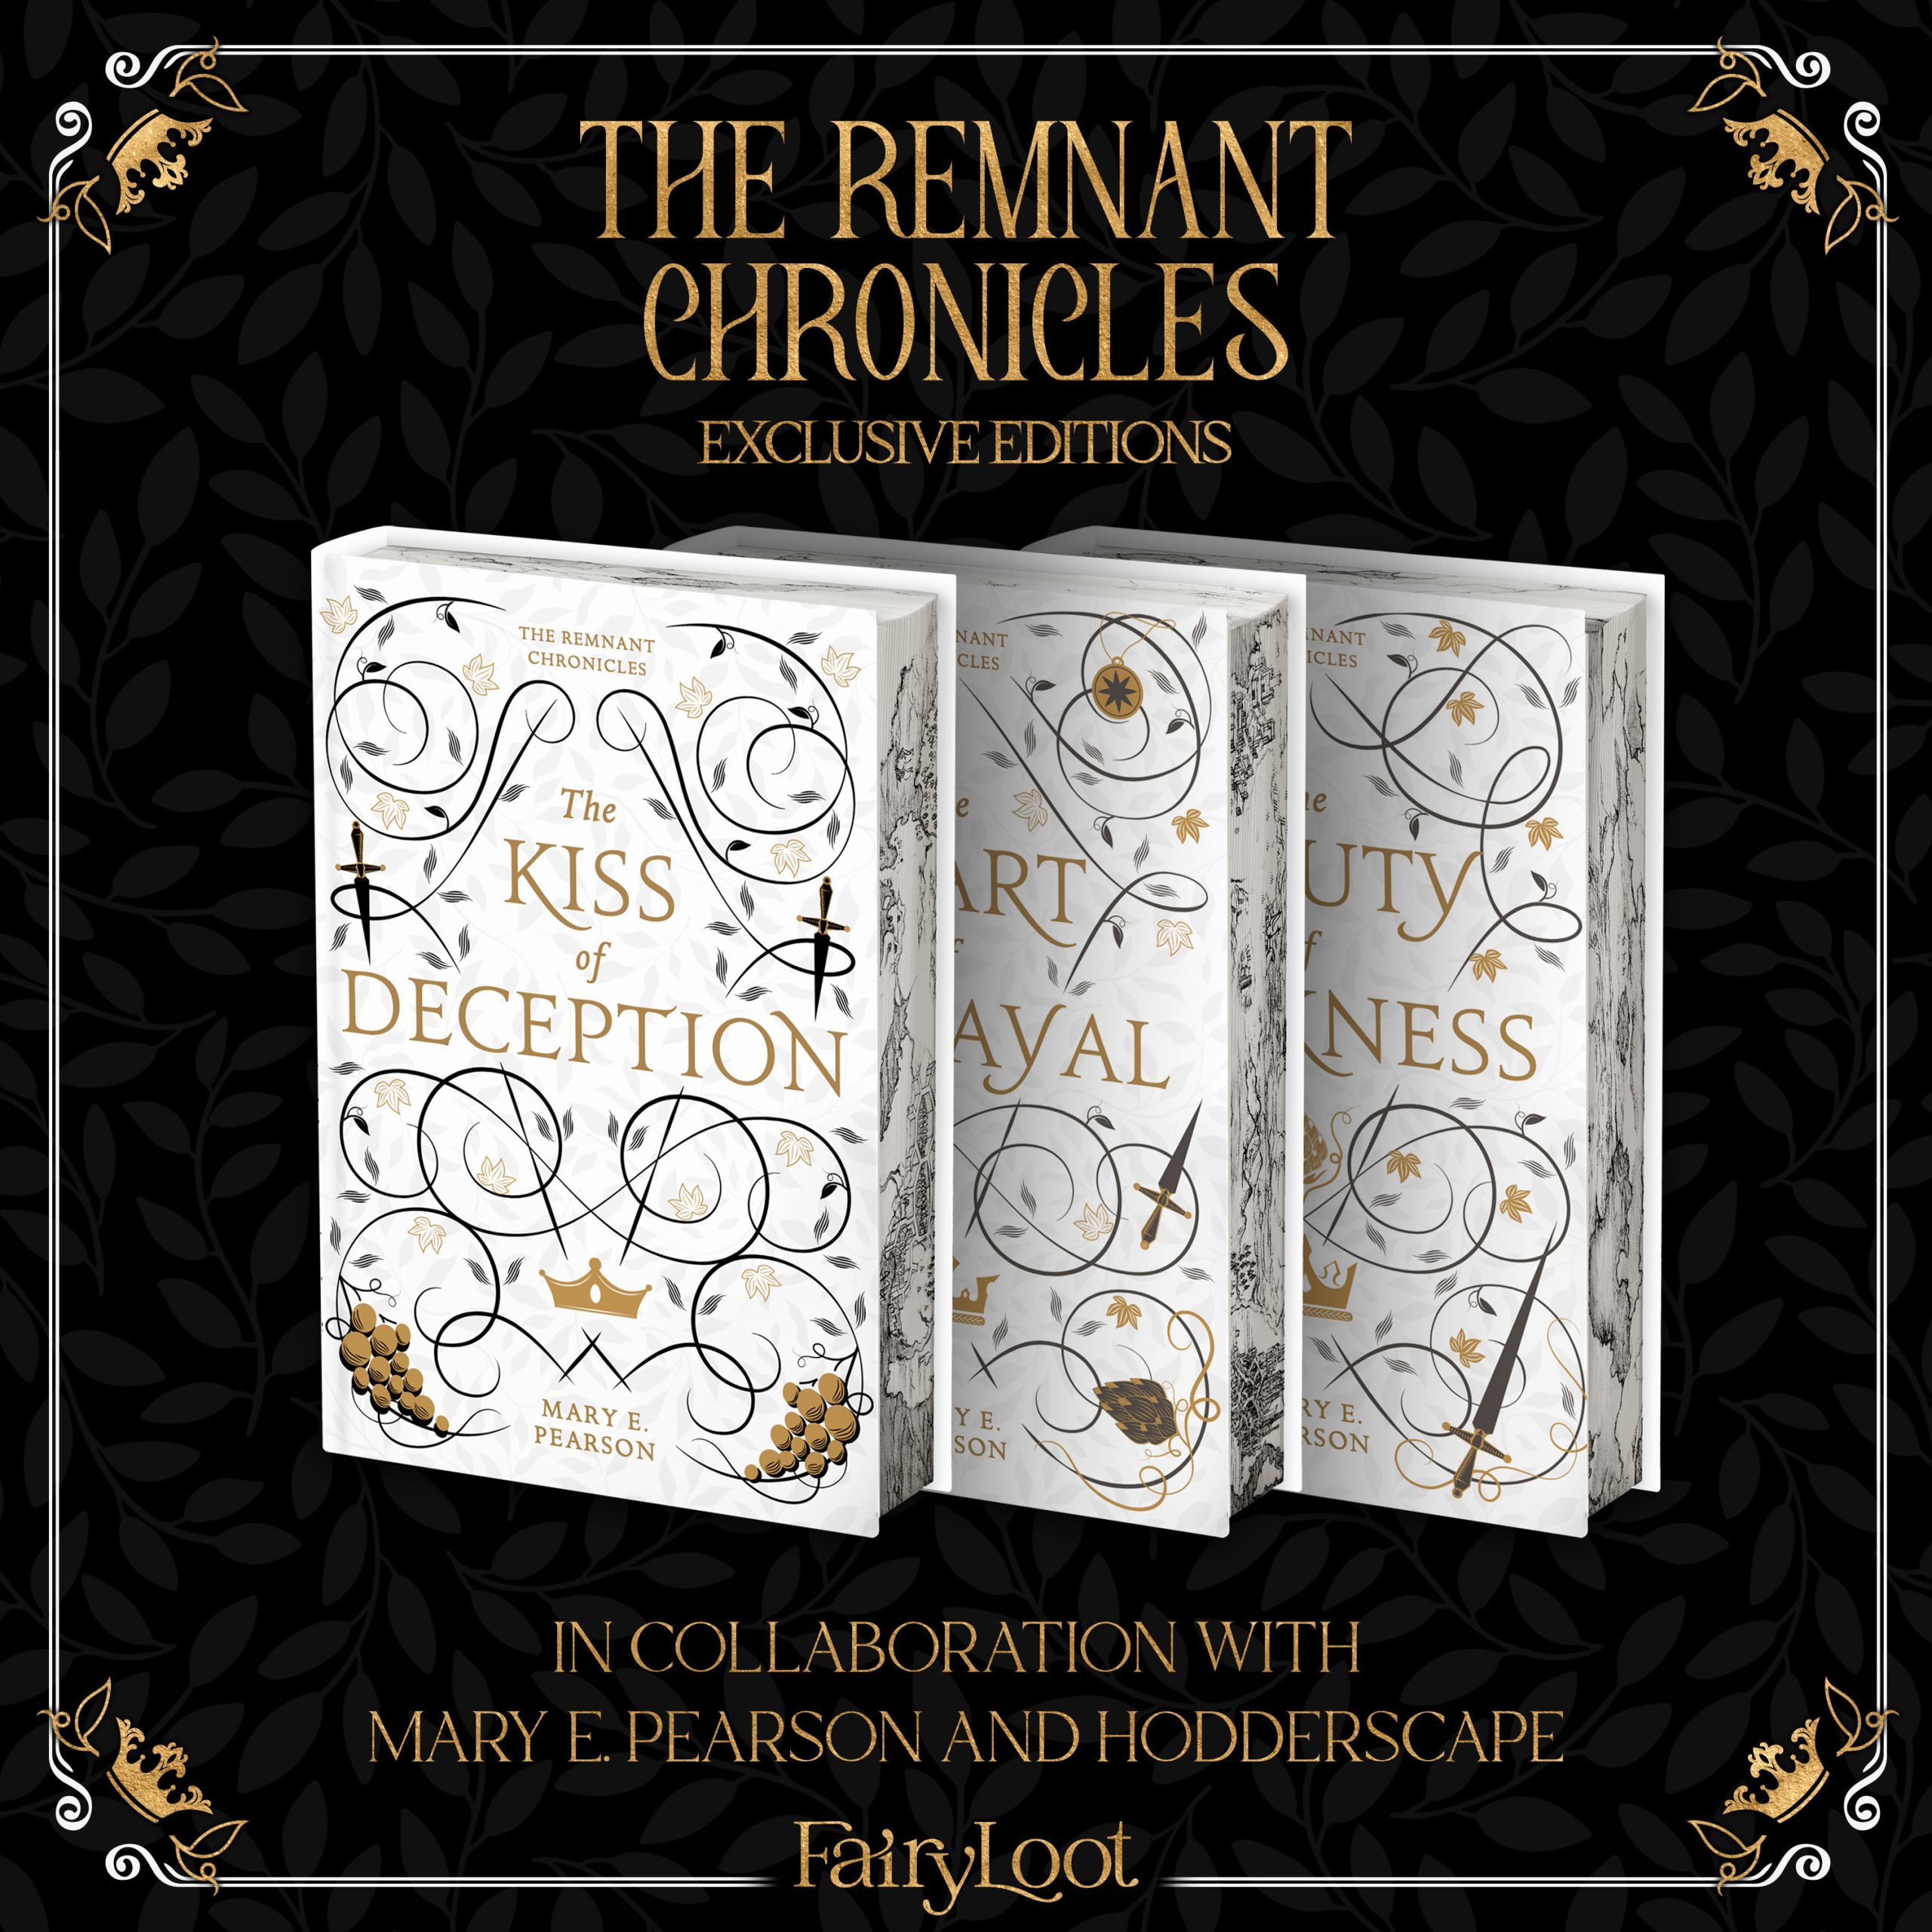 The Remnant Chronicles Exclusive Editions